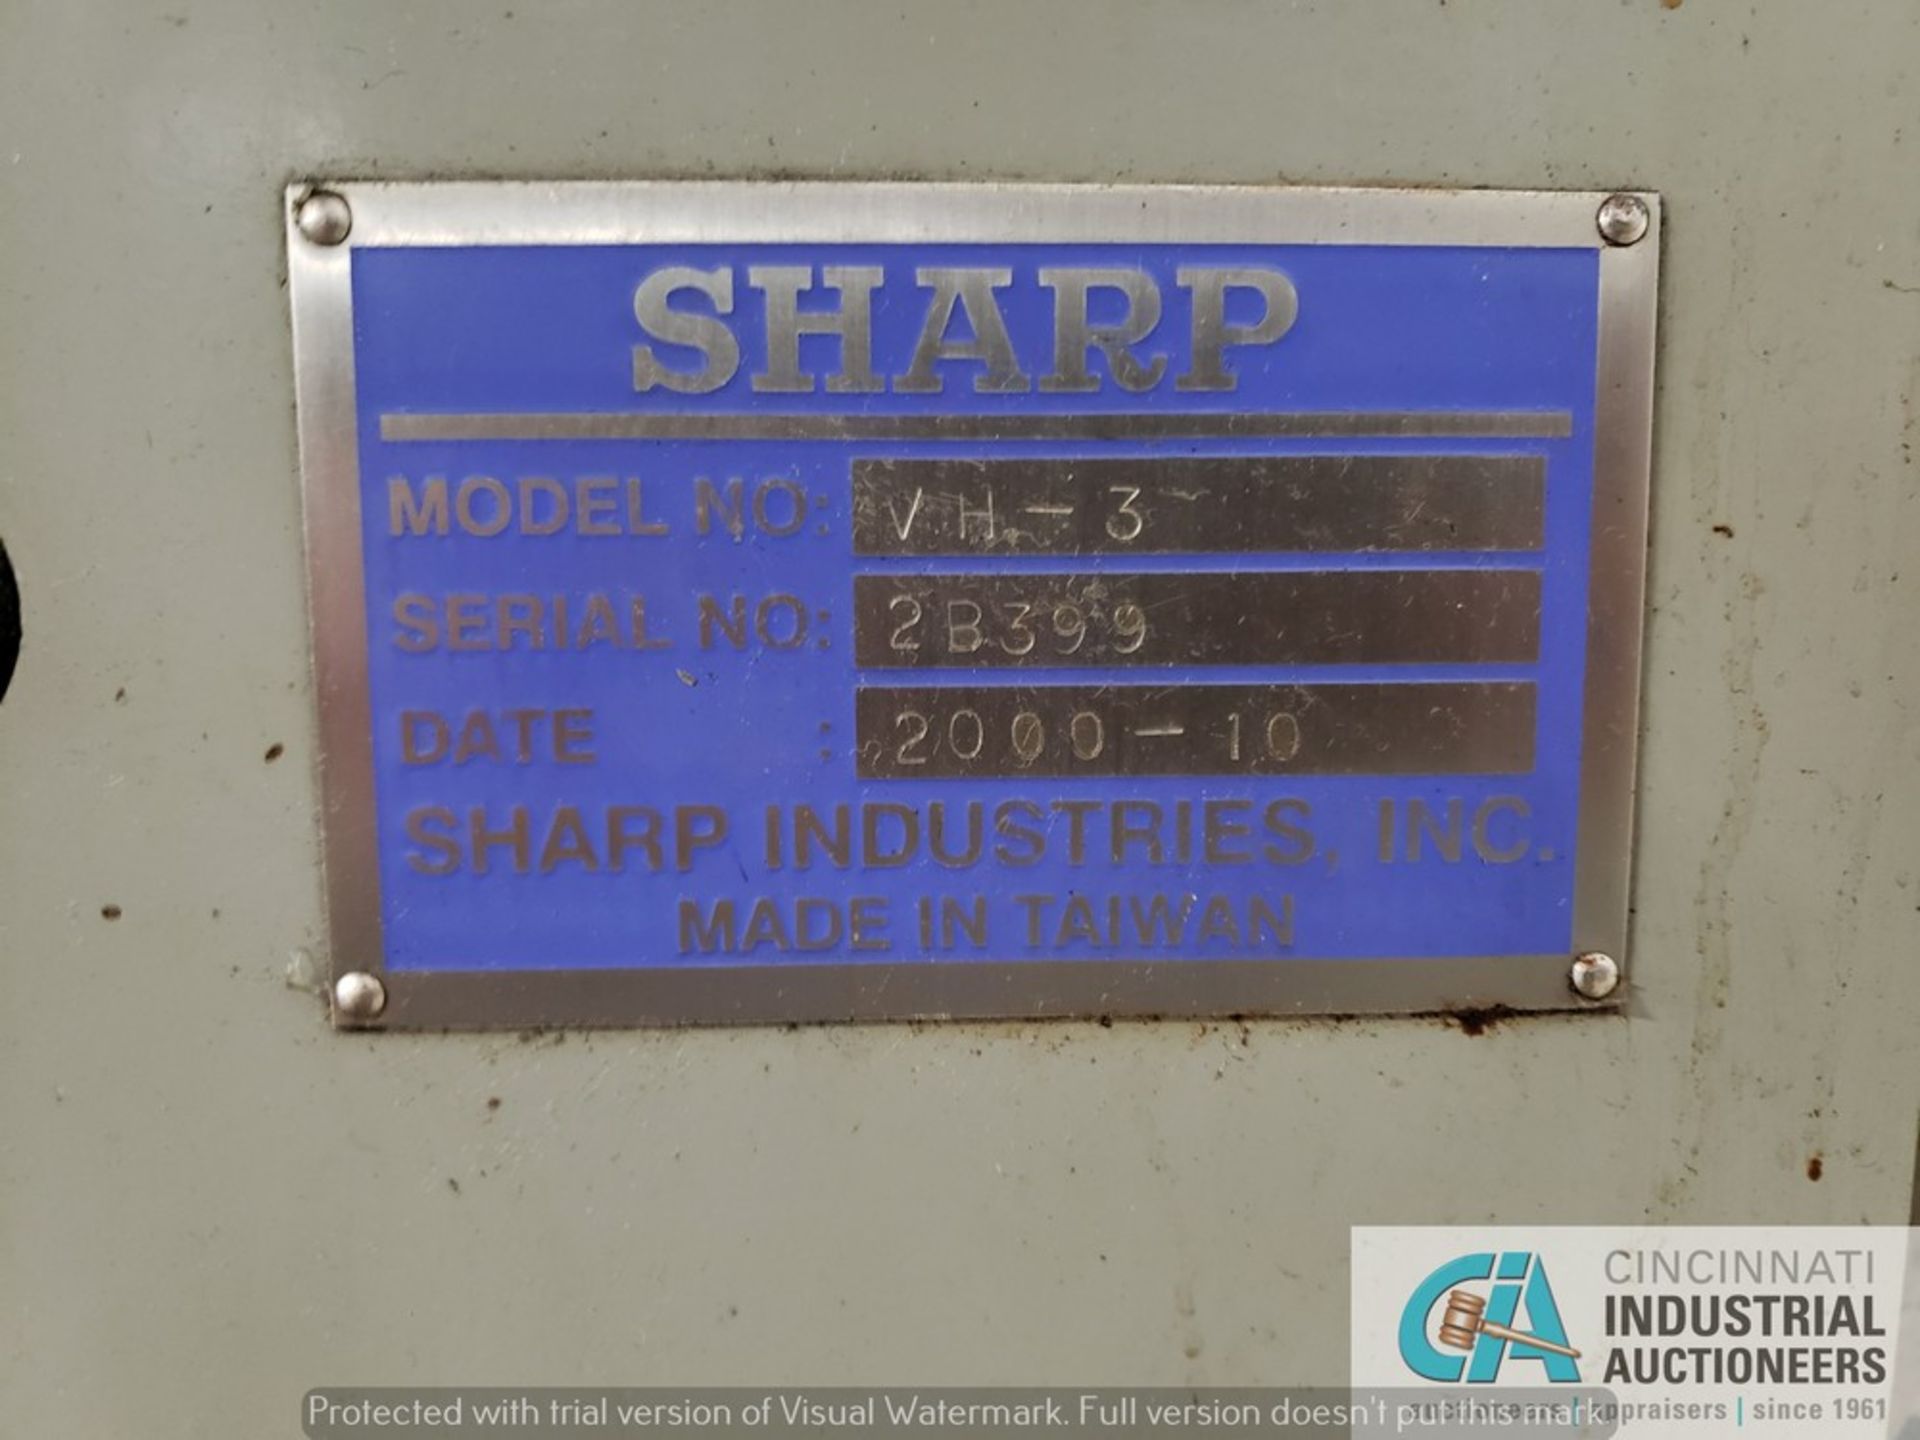 SHARPE MODEL VH3 VERTICAL MILLING MACHINE; S/N 2B399, 12" X 52" TABLE, SPINDLE SPEED 35-1,700 RPM, - Image 9 of 10